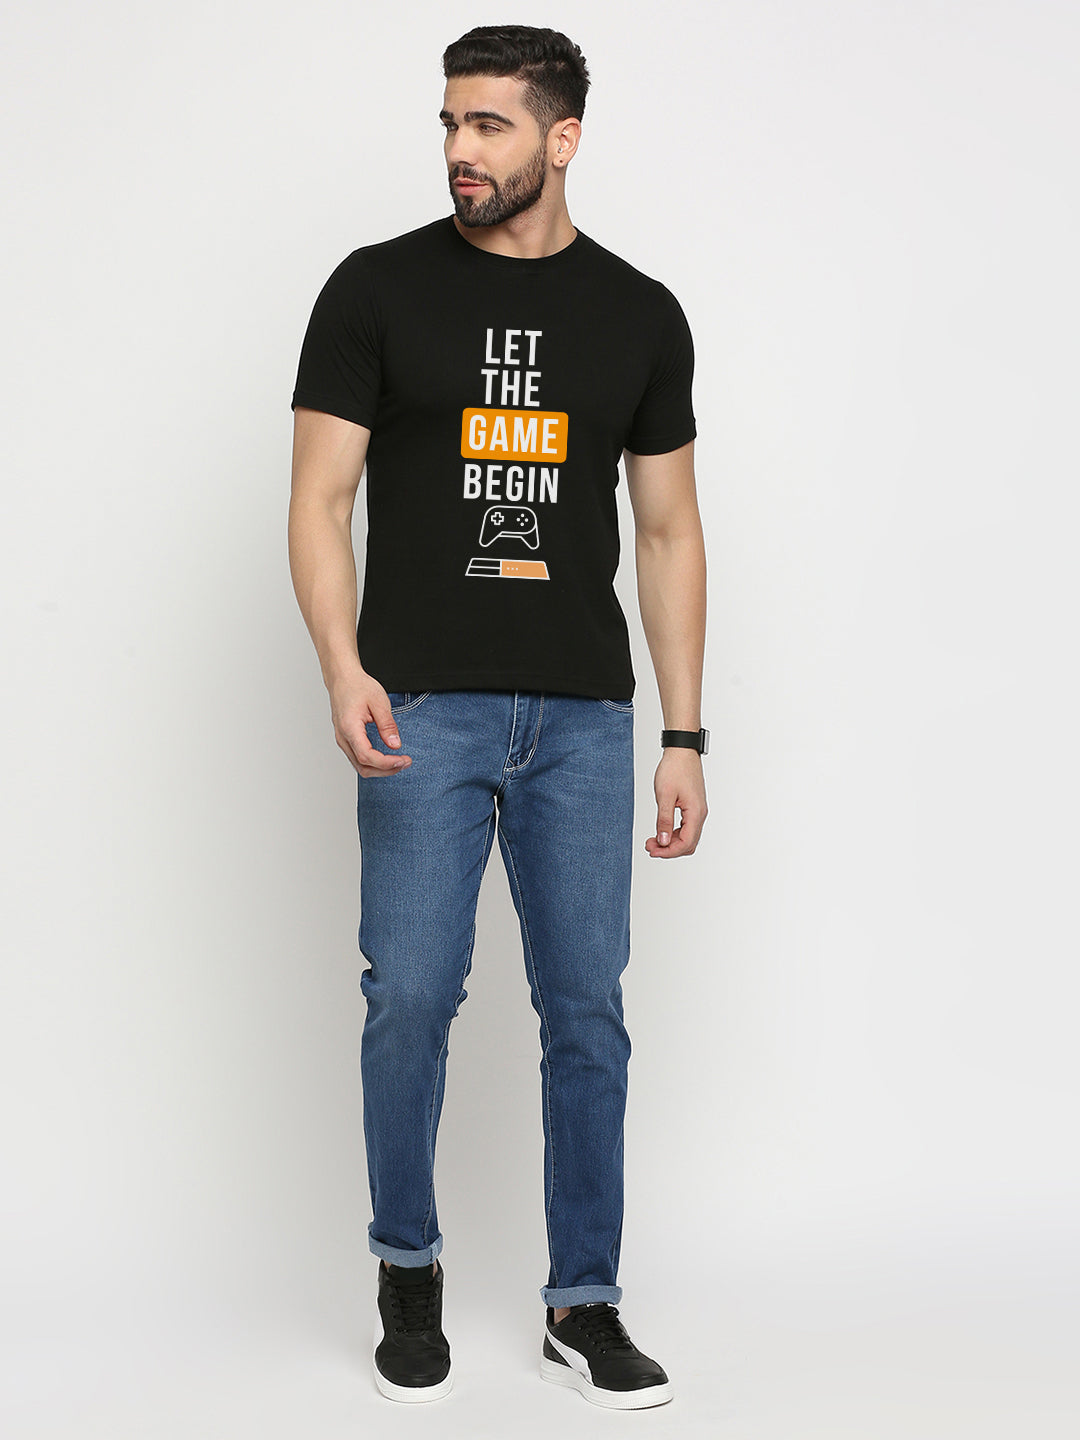 Let The Game Begin T-Shirt